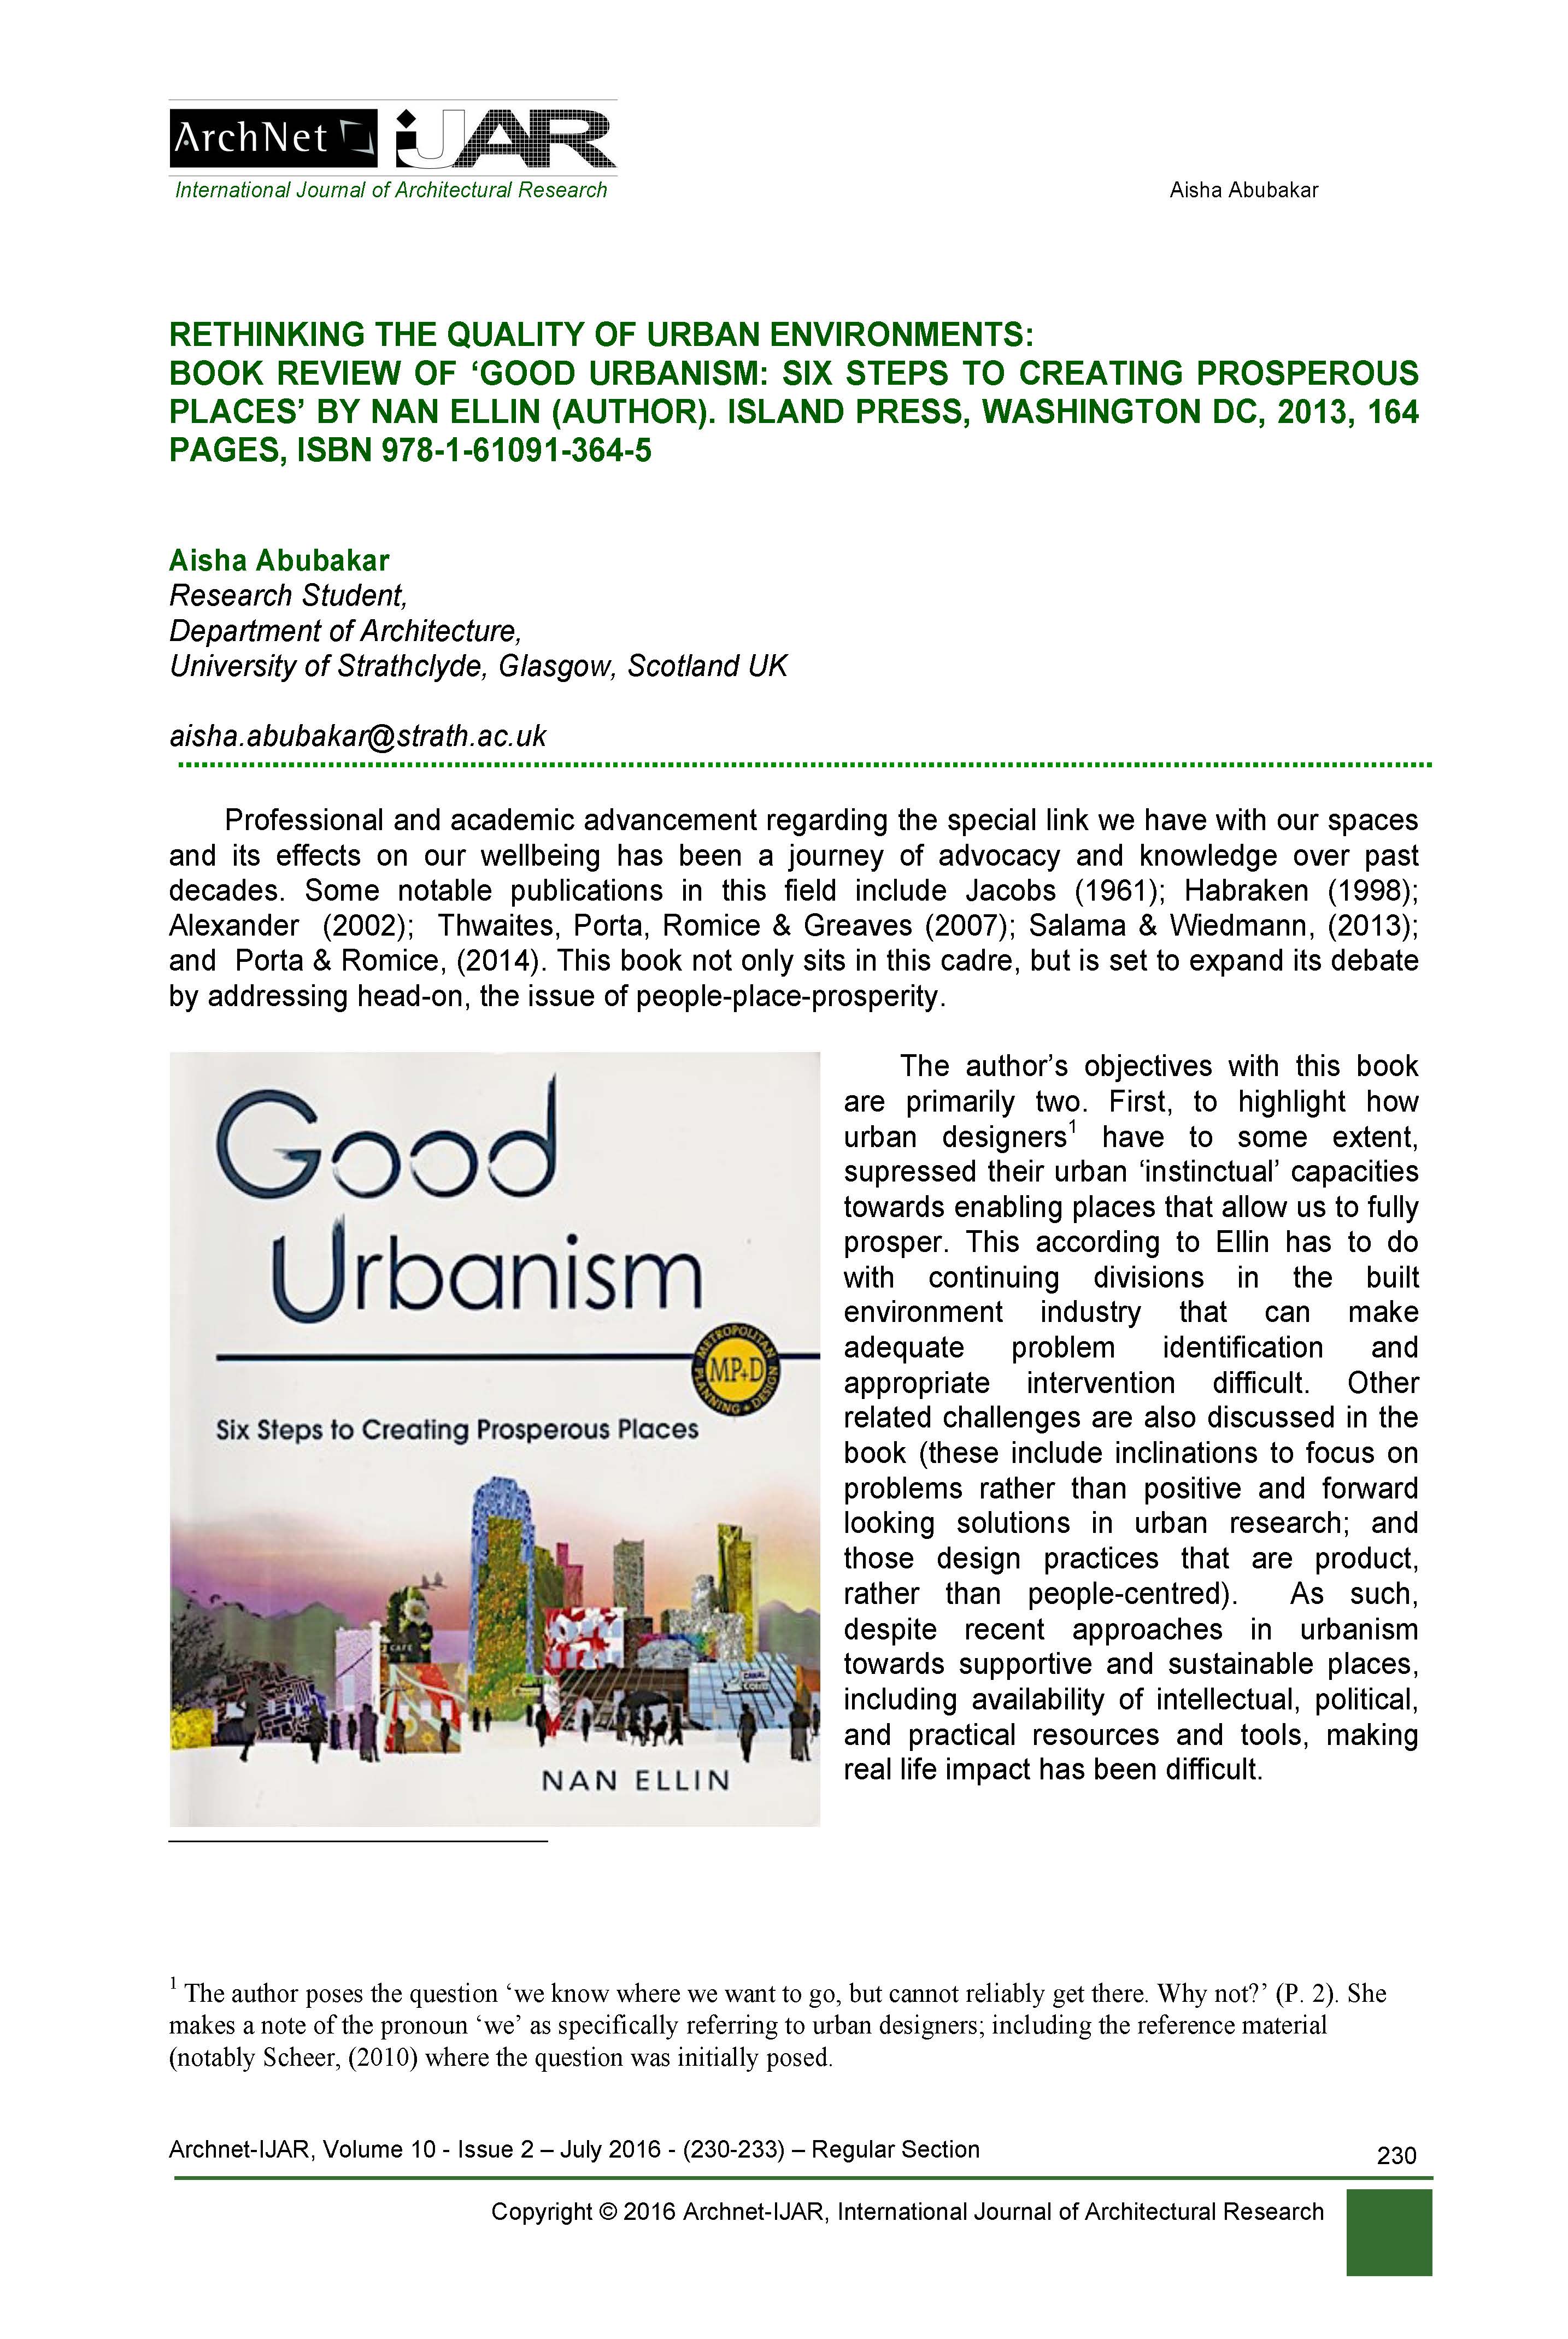 Aisha Abubakar - <p>Professional and academic advancement regarding the special link we have with our spaces and its effects on our wellbeing has been a journey of advocacy and knowledge over past decades. The book 'Good Urbanism: Six steps to creating Prosperous places' by Nan Ellin not only sits in this cadre, but expands the debate by addressing head-on, the issue of people-place-prosperity.</p><p><span style="font-weight: bold;">Keywords:&nbsp;</span></p><p>prosperity; sustainability; people; cities<br></p>